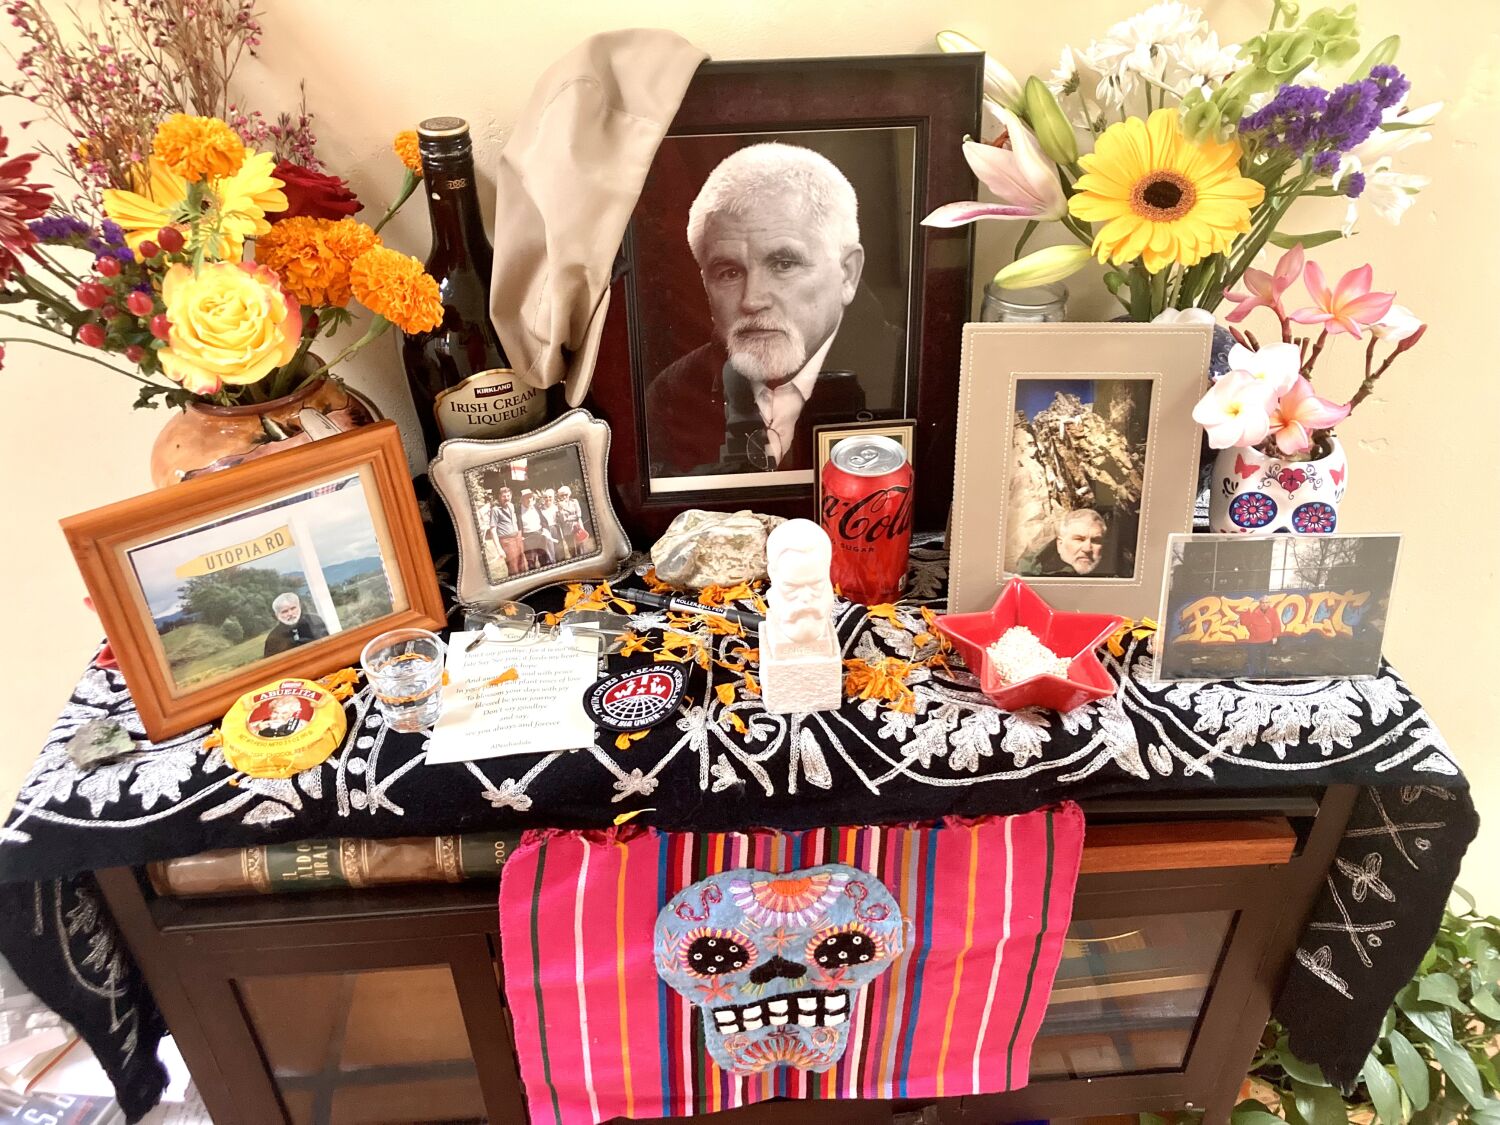 What Mike Davis' family put into his ofrenda, and what he offered them